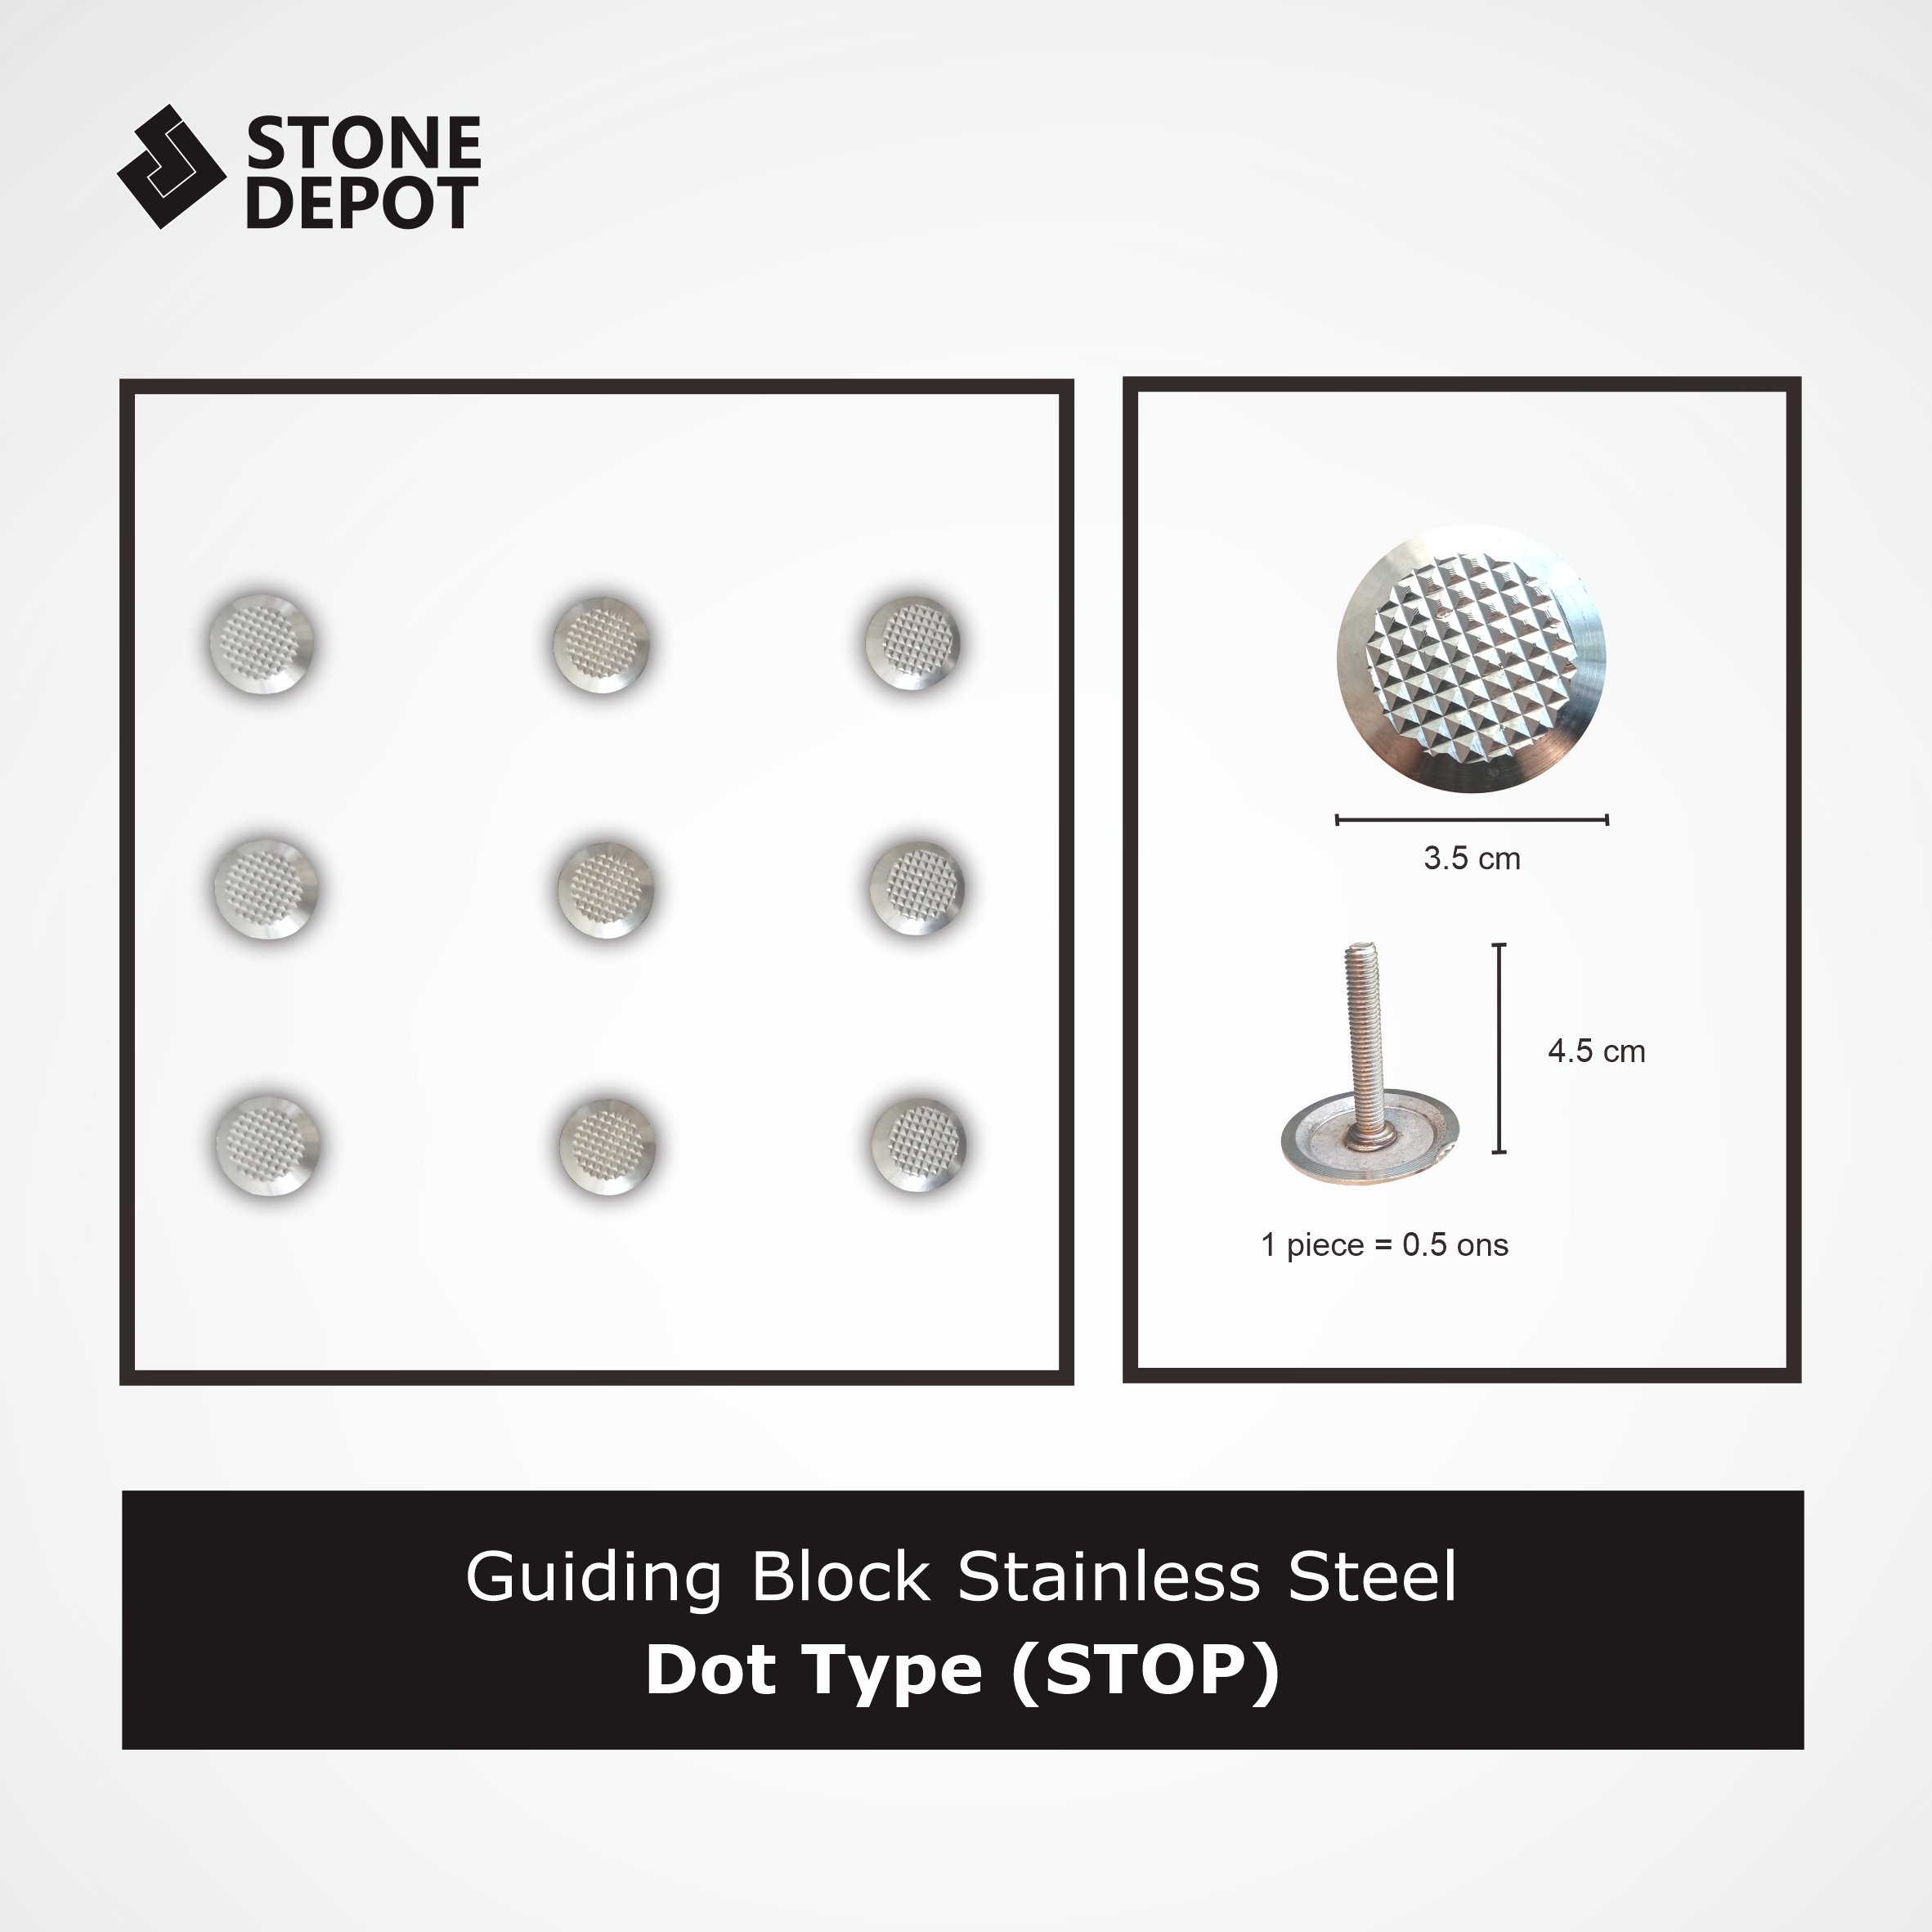 guiding_block_dot type_Stainless Steel_totol_stop_1